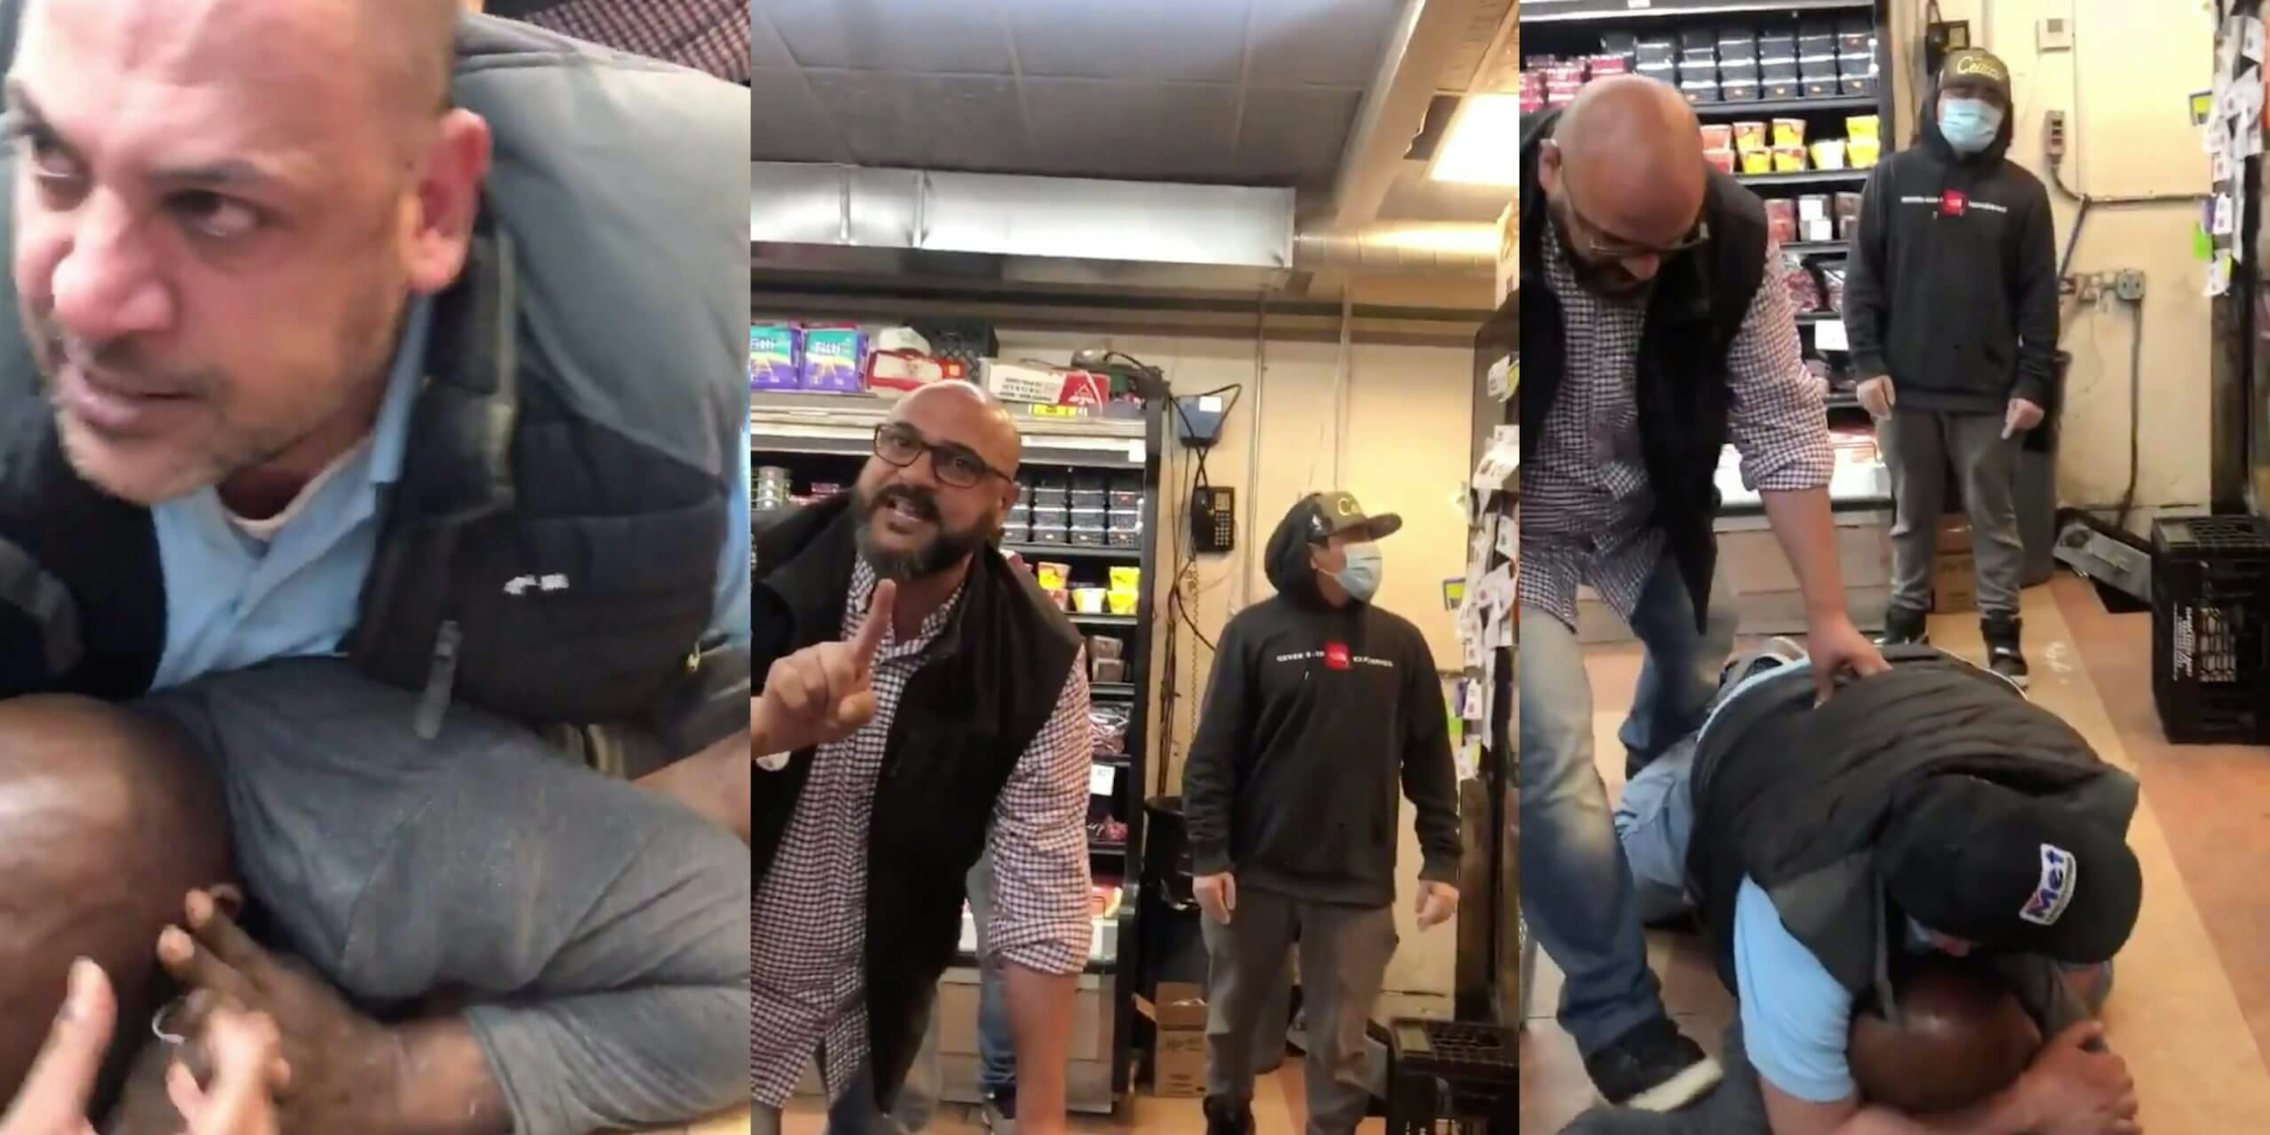 Screengrabs show two employees at Metfoods Supermarket stepping on and putting Black man on chokehold